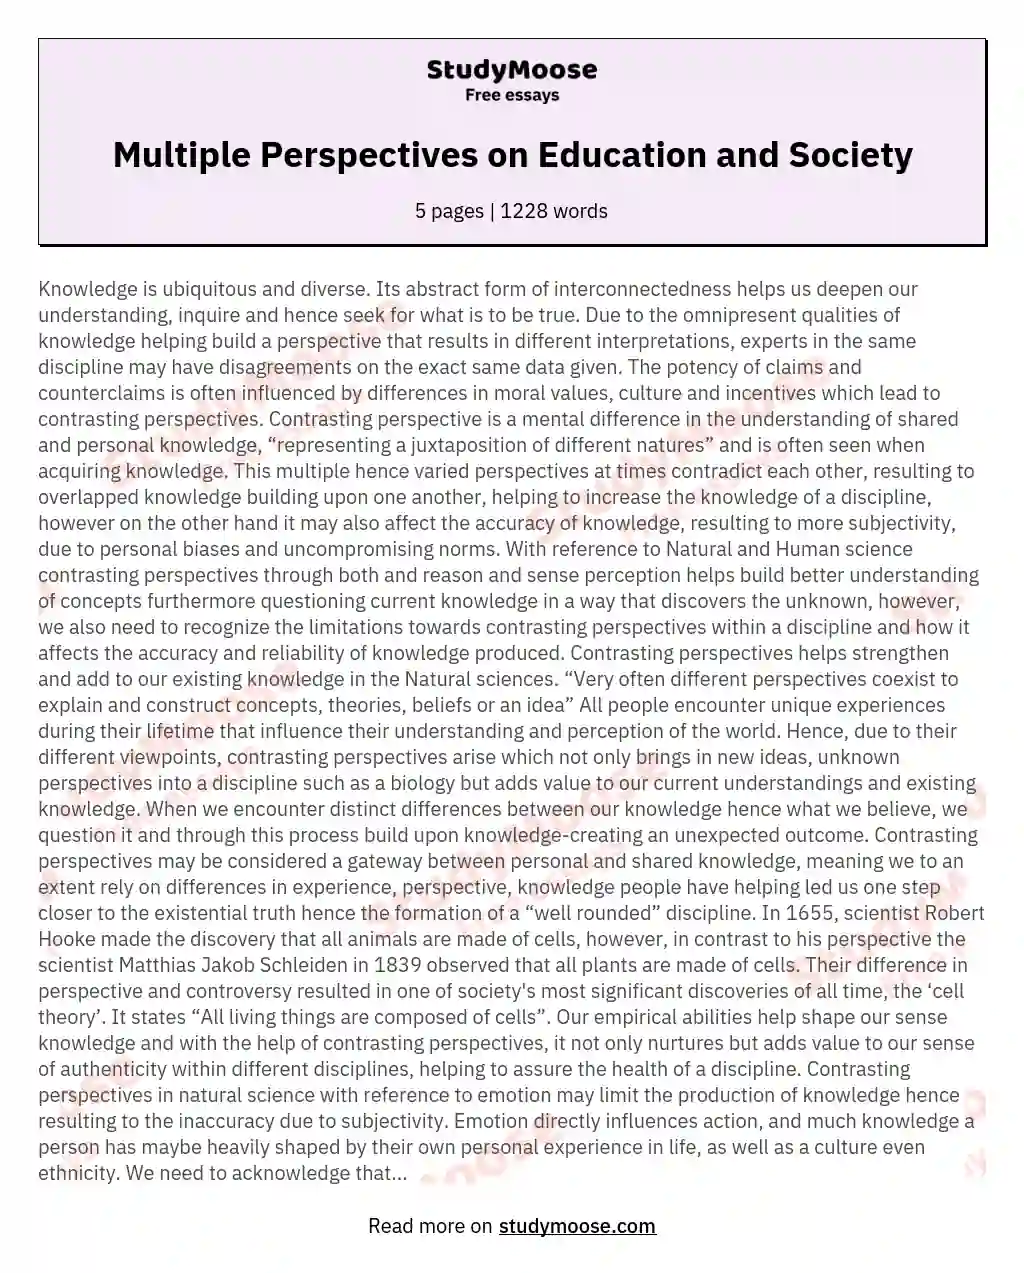 Multiple Perspectives on Education and Society essay